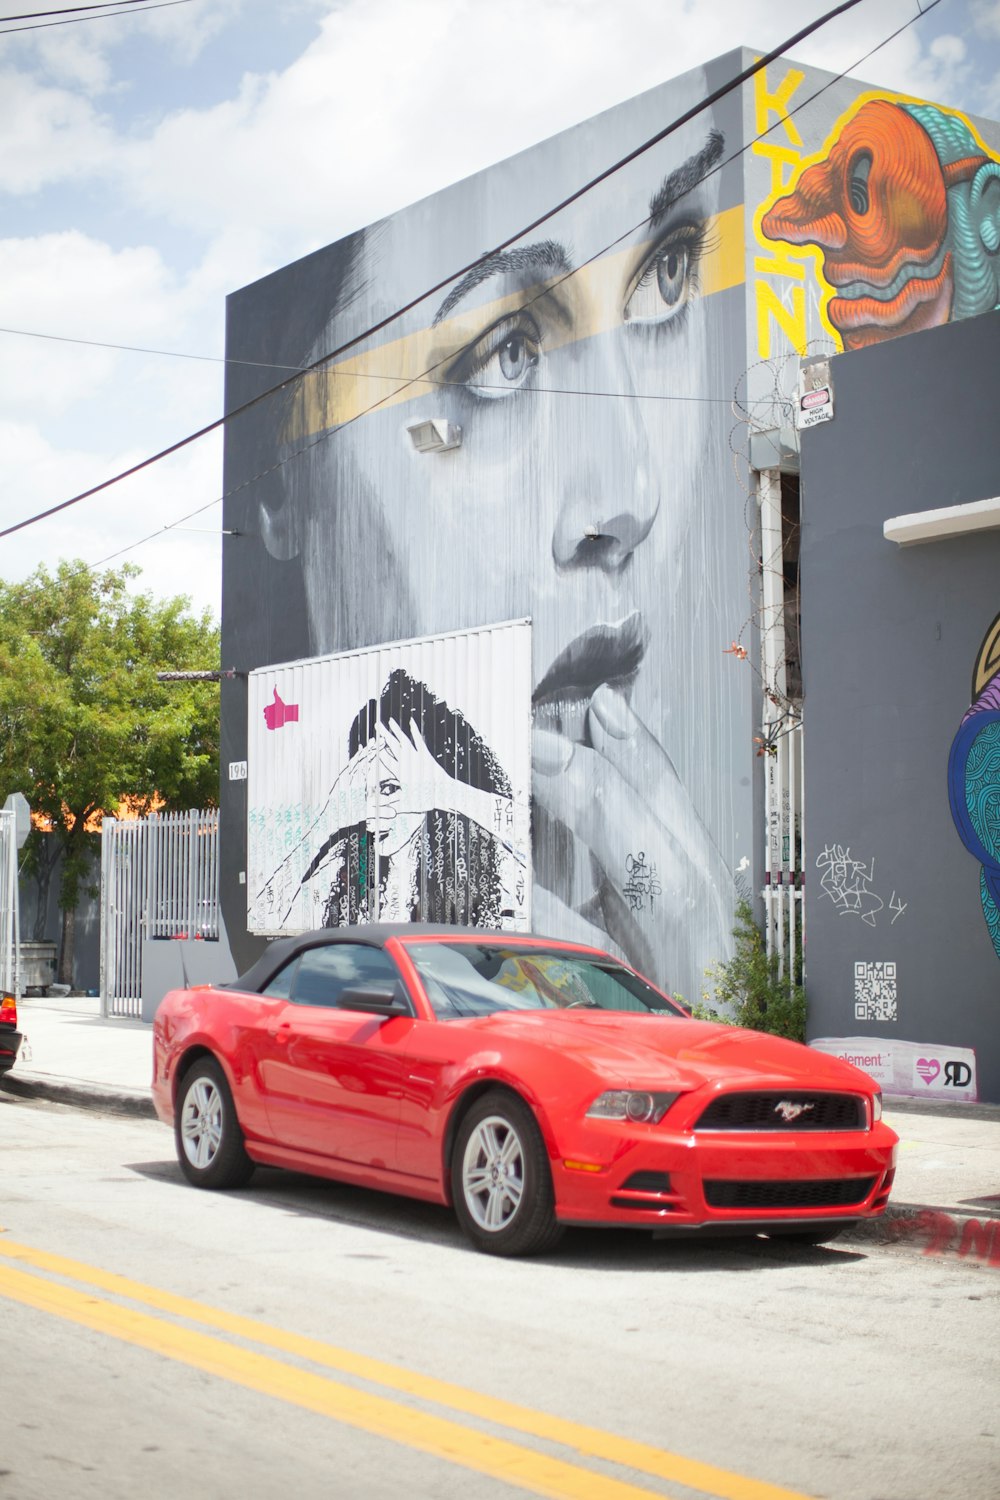 red and black Ford Mustang coupe parked beside building with graffiti during daytime